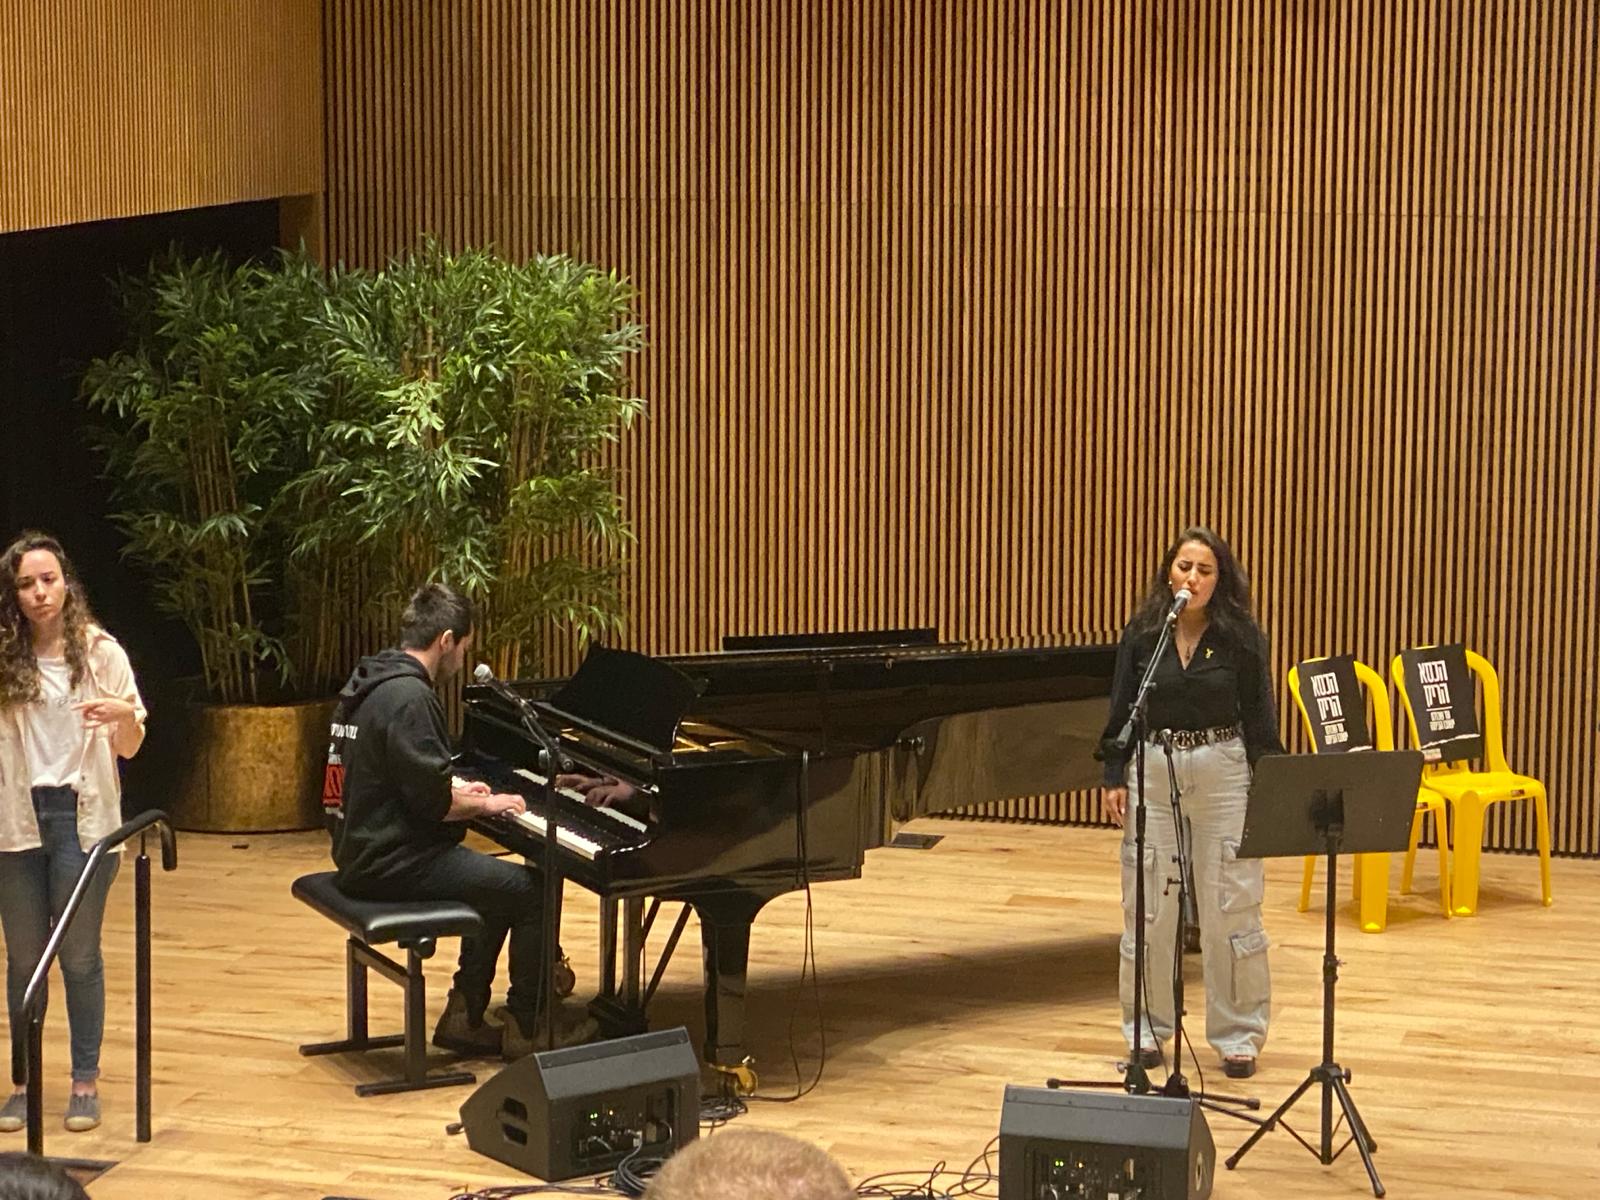 Zehava and Tamir perform a musical interlude